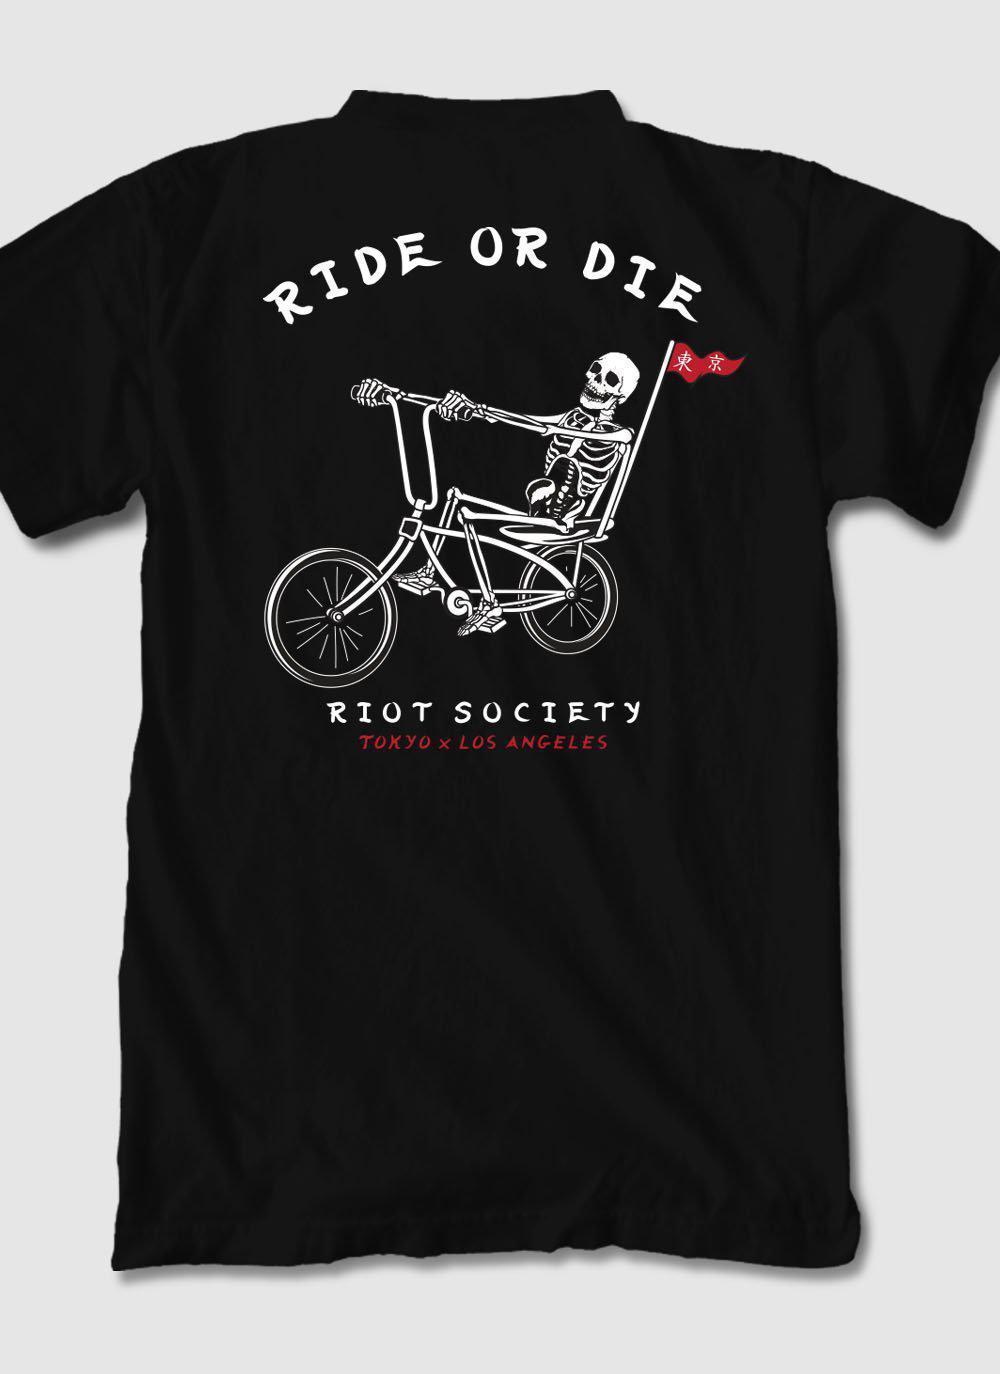 Riot Society Similar stores, new products, store review, Q&A Modvisor